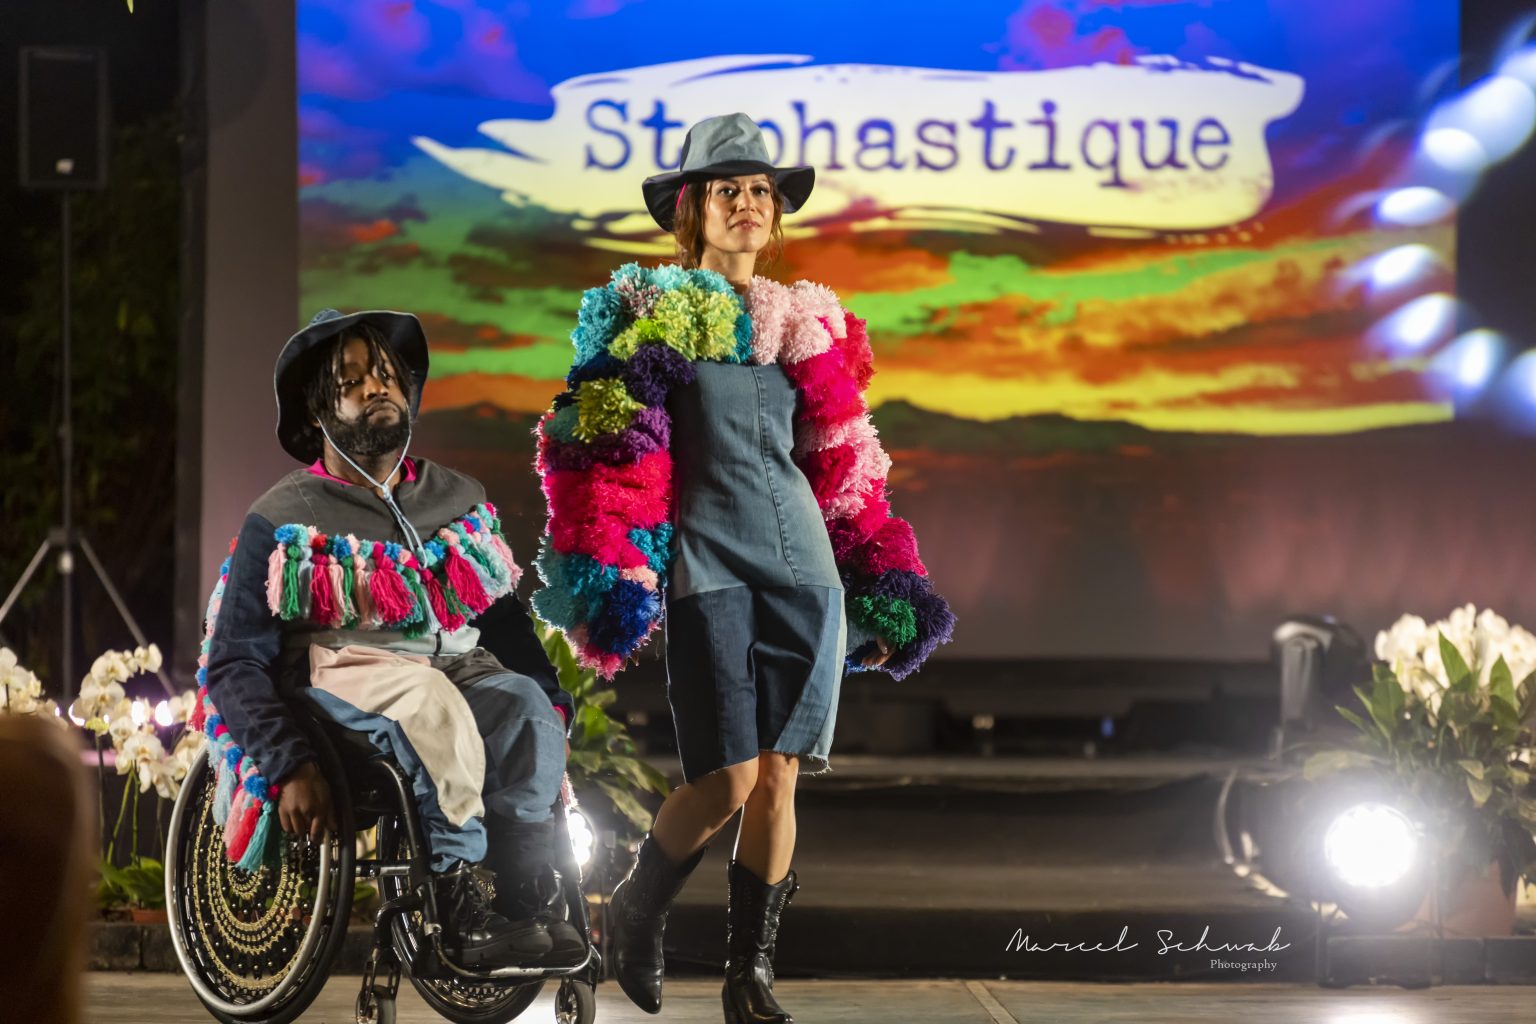 Load video: Stephastique Leftover Lover collection presented during Diversity Fashion Week. Sustainble designs made from leftover and eco friendly fabrics